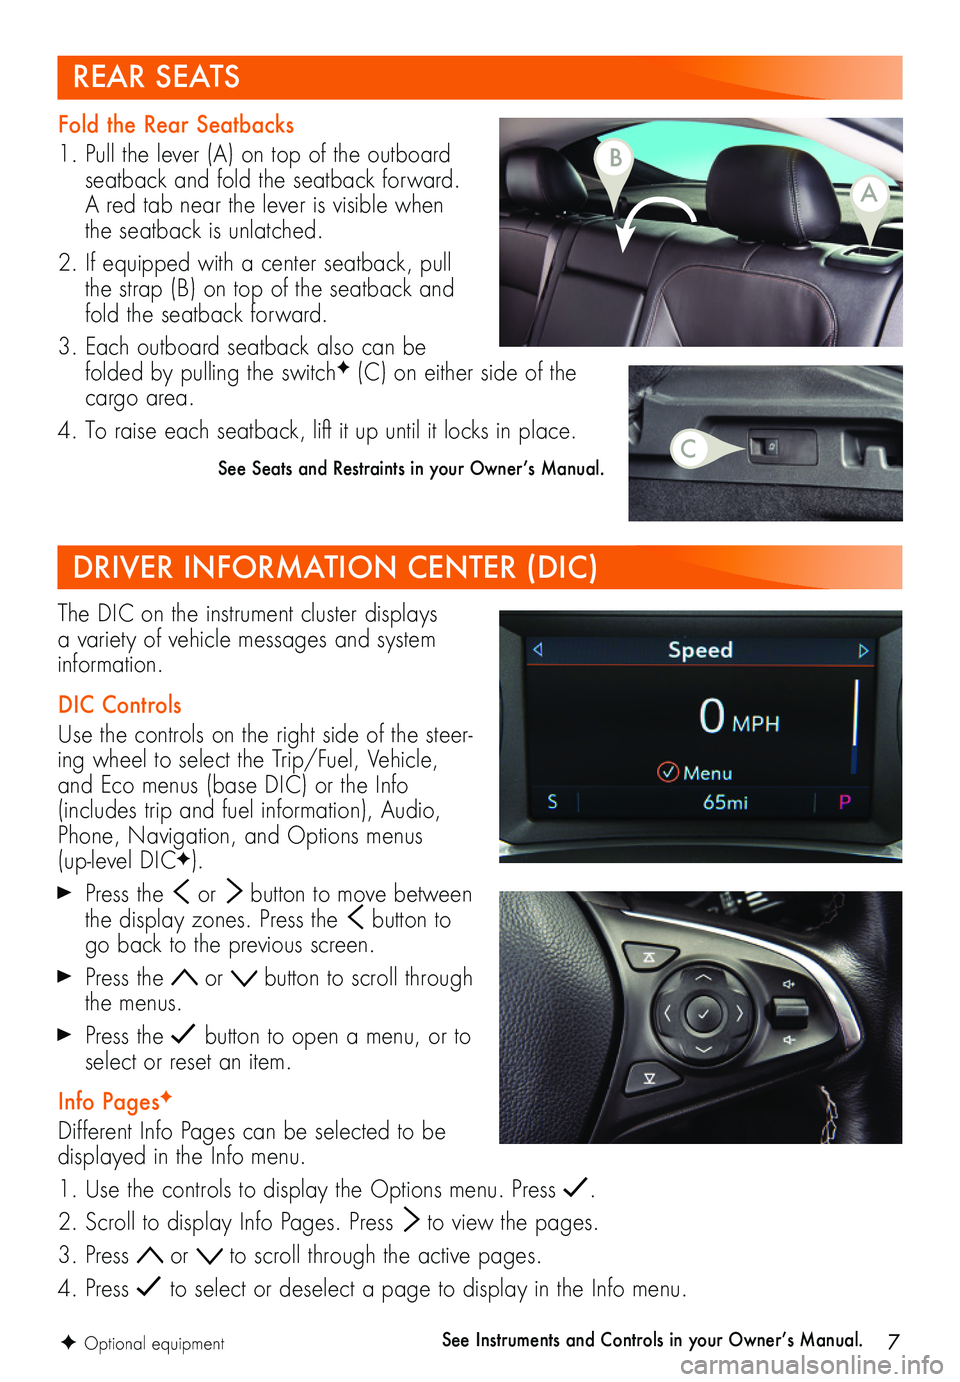 BUICK REGAL SPORTBACK 2019  Get To Know Guide 7
The DIC on the instrument cluster displays a variety of vehicle messages and system  information. 
DIC Controls
Use the controls on the right side of the steer-ing wheel to select the Trip/Fuel, Veh